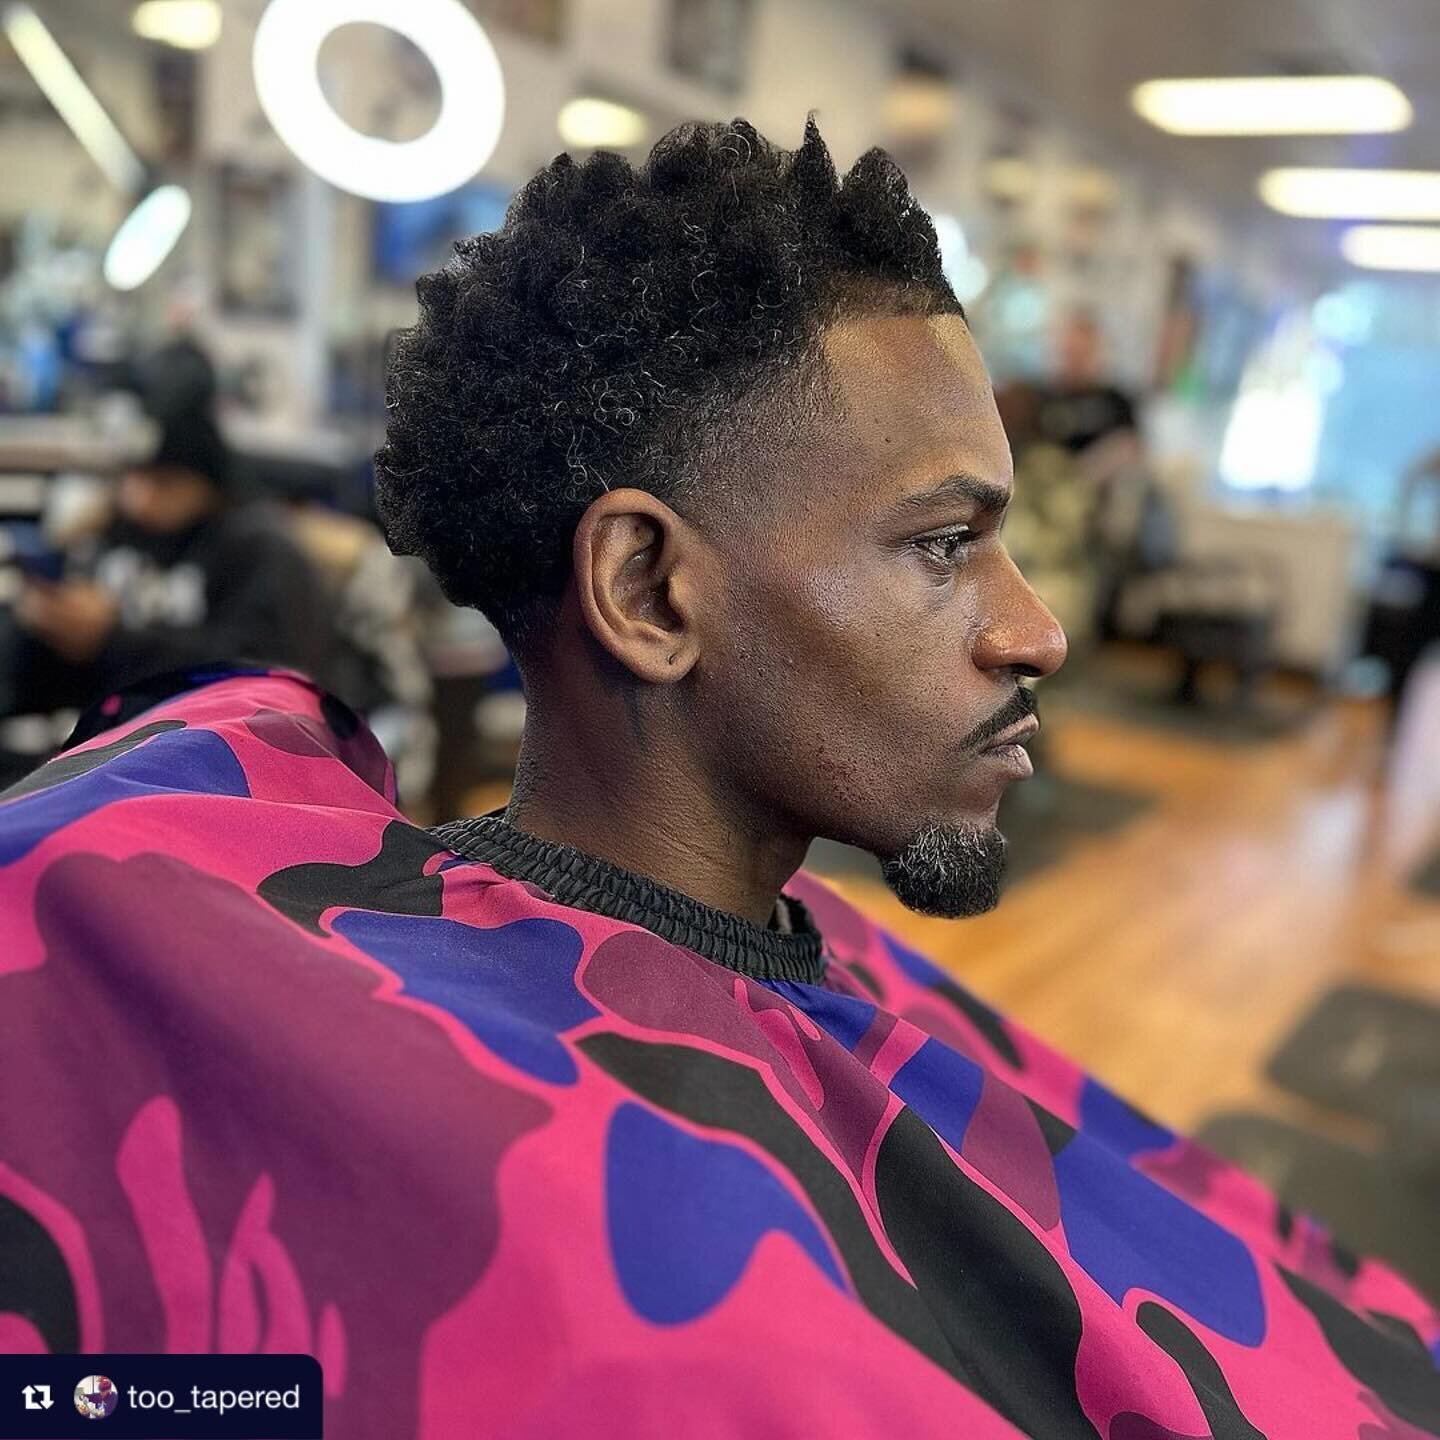 Repost from @too_tapered
&bull;
&ldquo;Too_tapered&rdquo; Book your appointments. #tootapered #natural #blendz401💈#oceanstatebarber #osbahaircuts #barbershopconnect #barbershop #barber #iphone #iphonepics #taper #beard #barbersarehiphop #curlsponge 